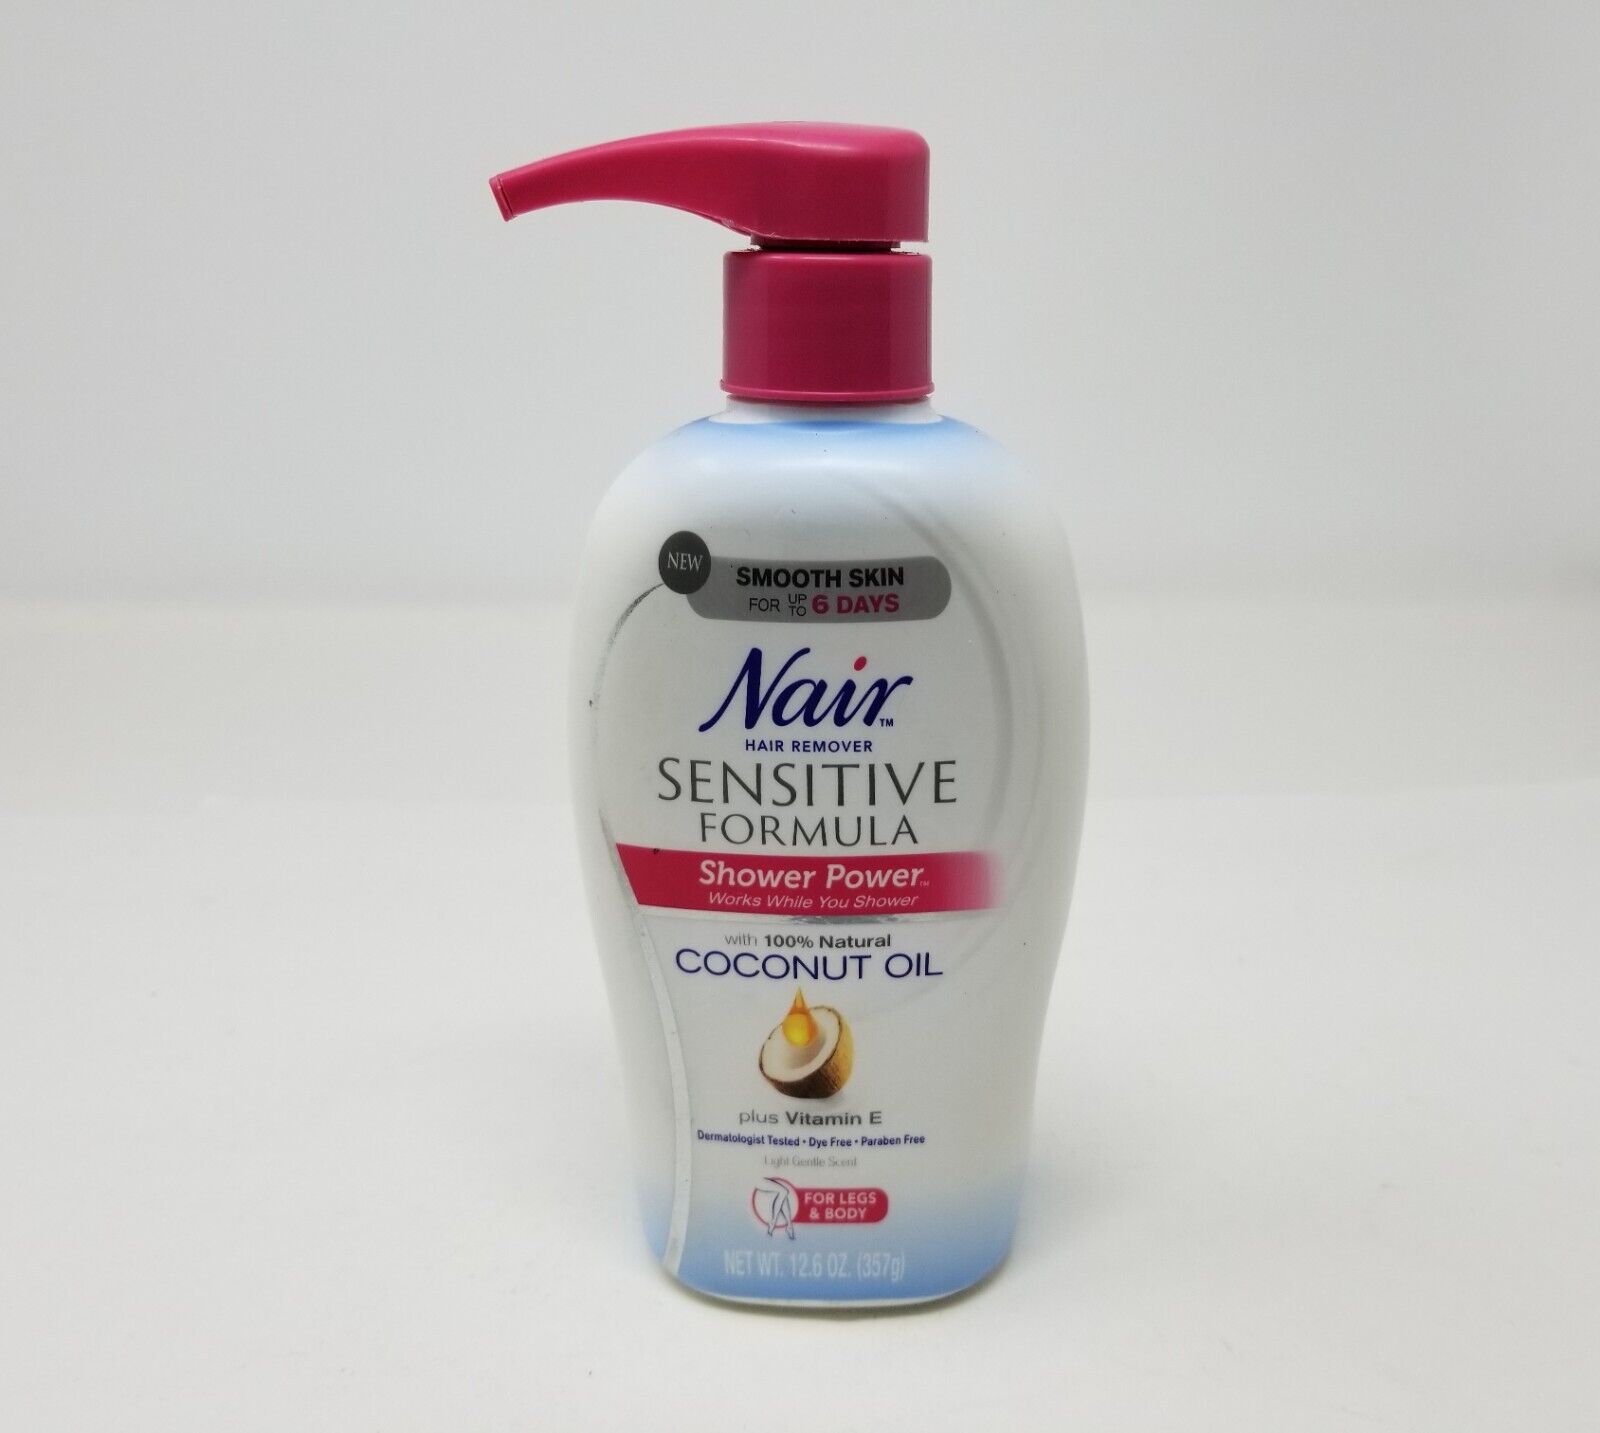 Nair Hair Remover Sensitive Formula Shower Power with Coconut Oil and Vitamin E, 12.6oz